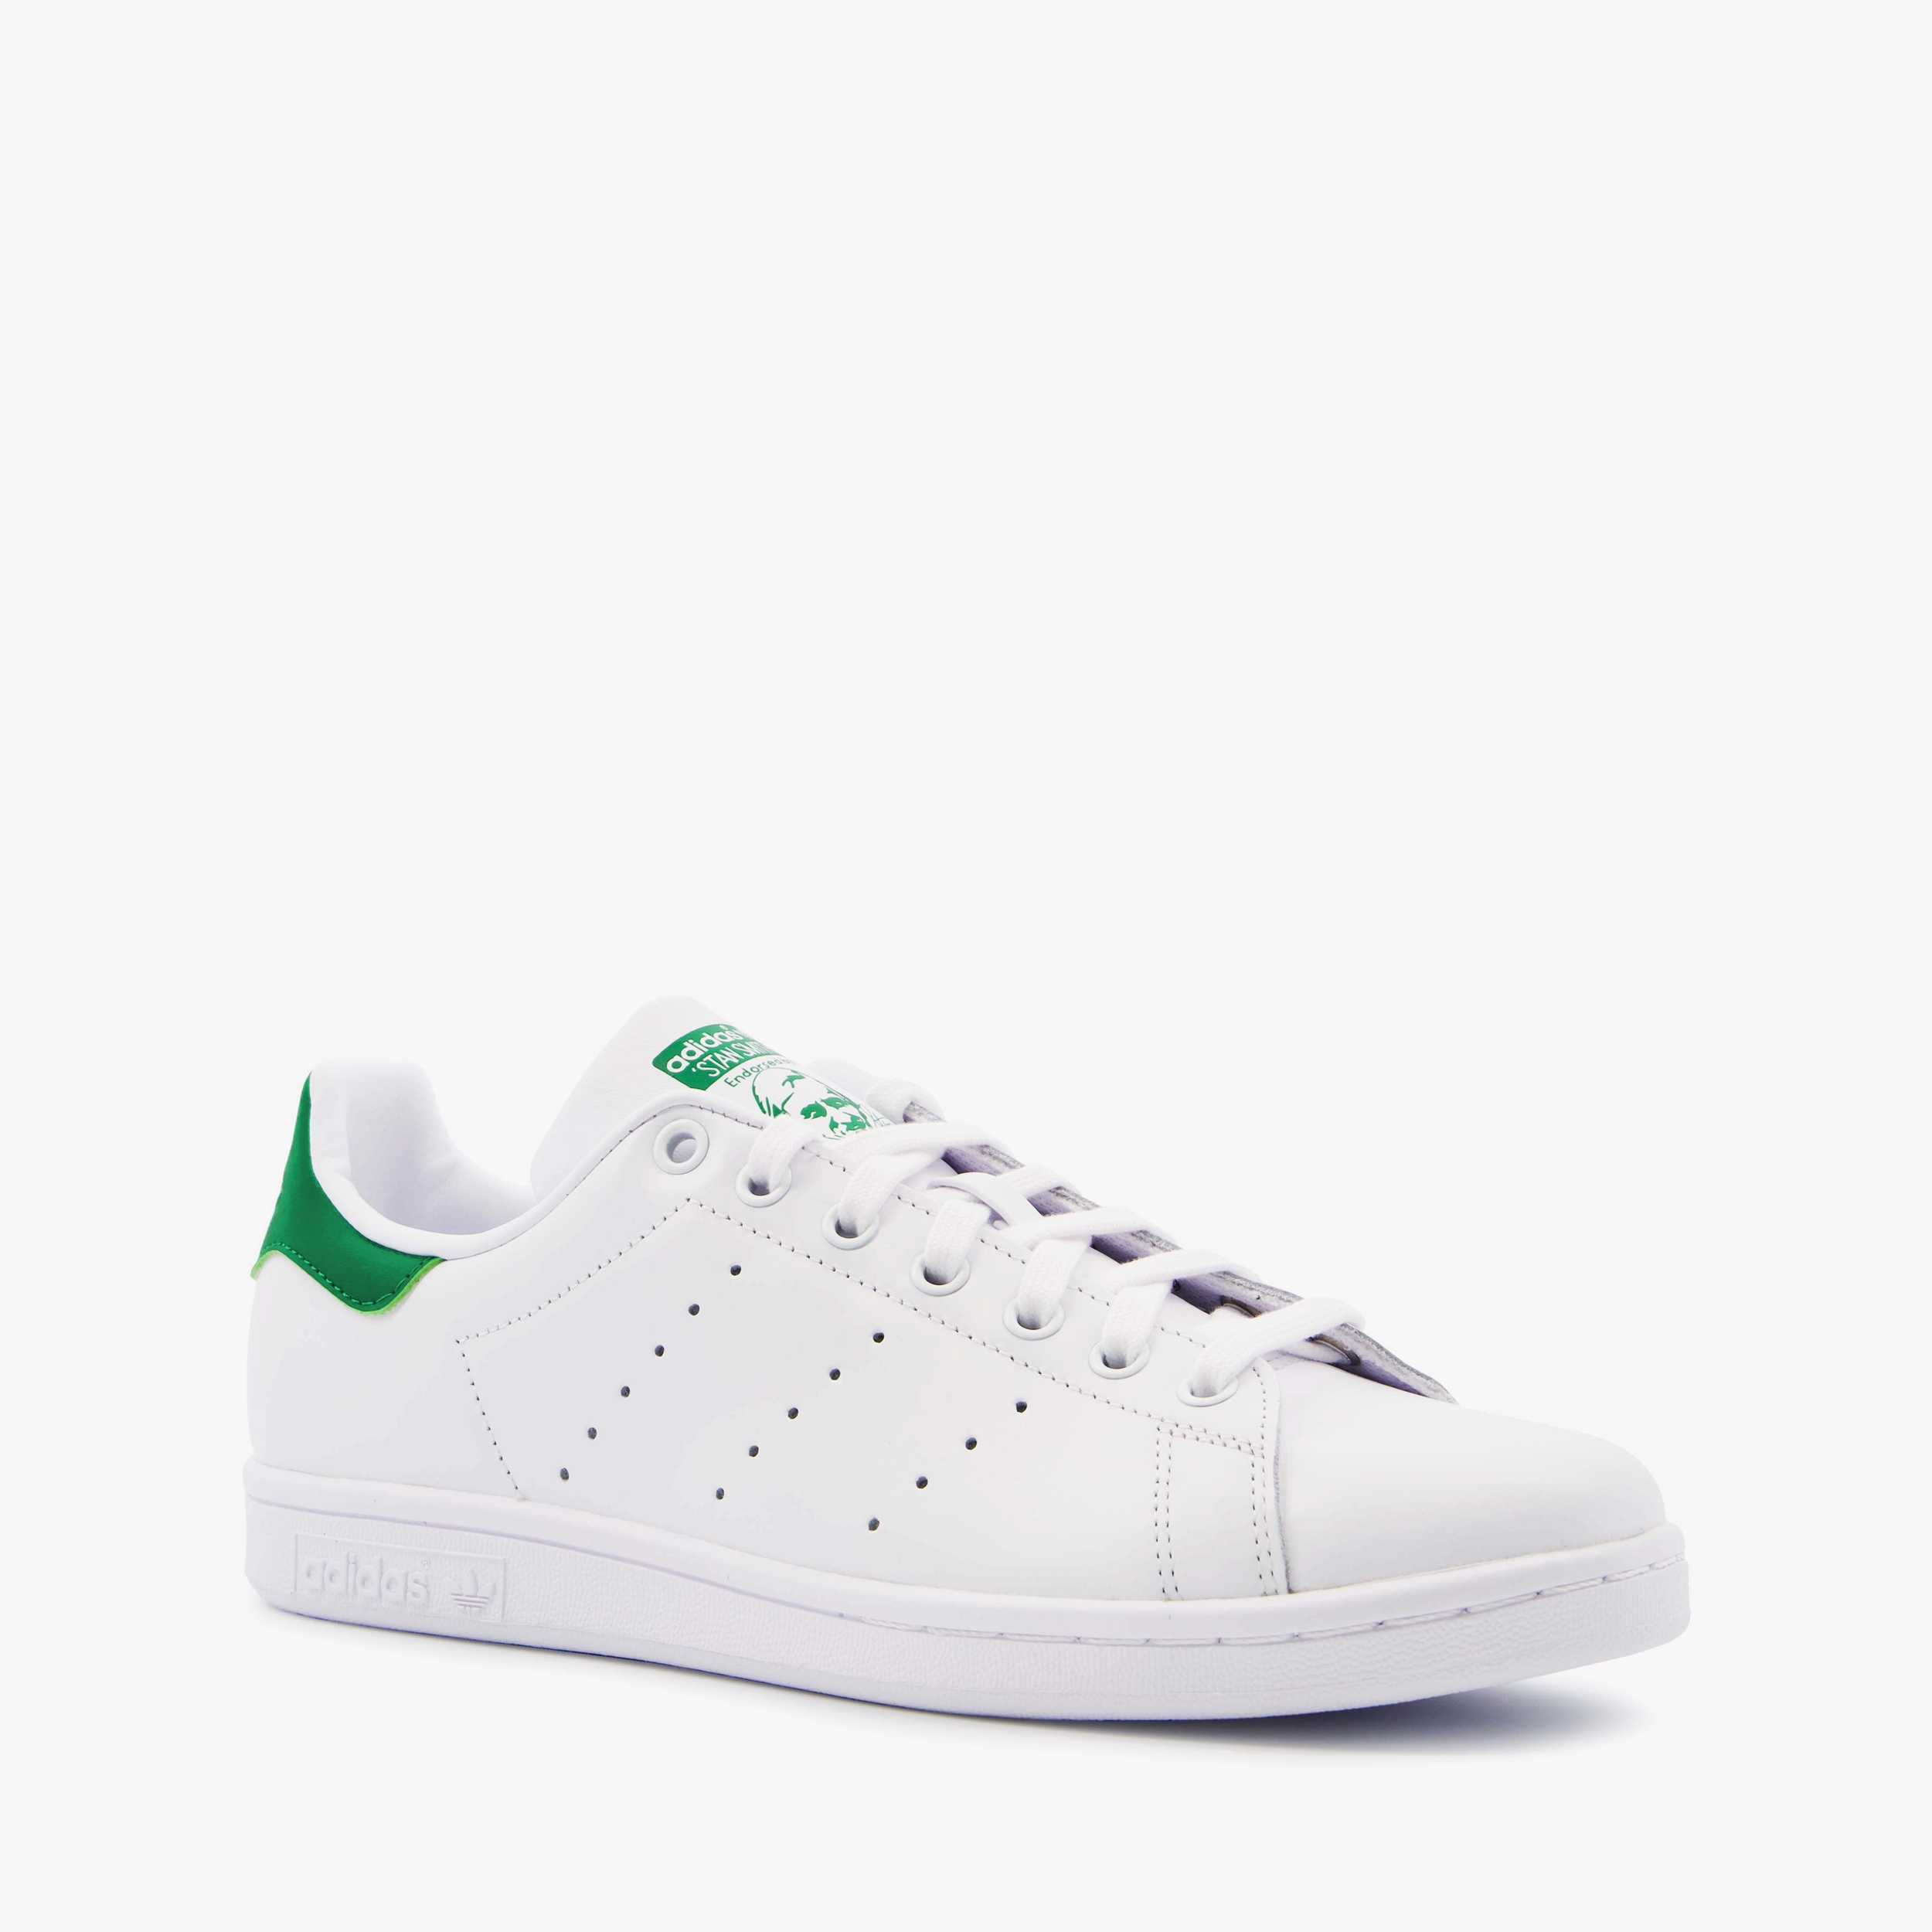 Buy > adidas gympen > in stock